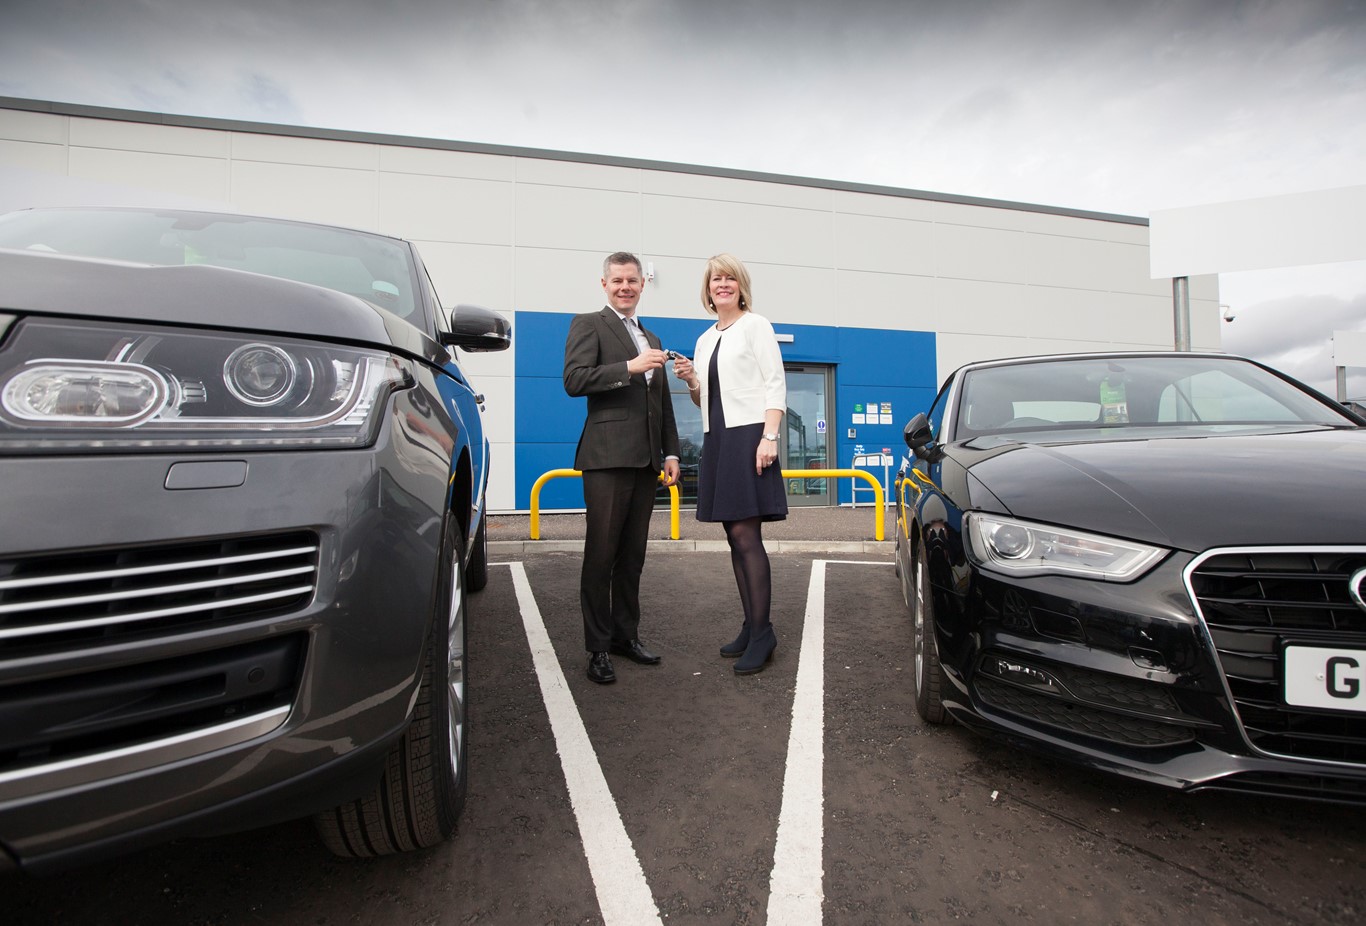 Finance Secretary officially opens new consolidated car rental centre